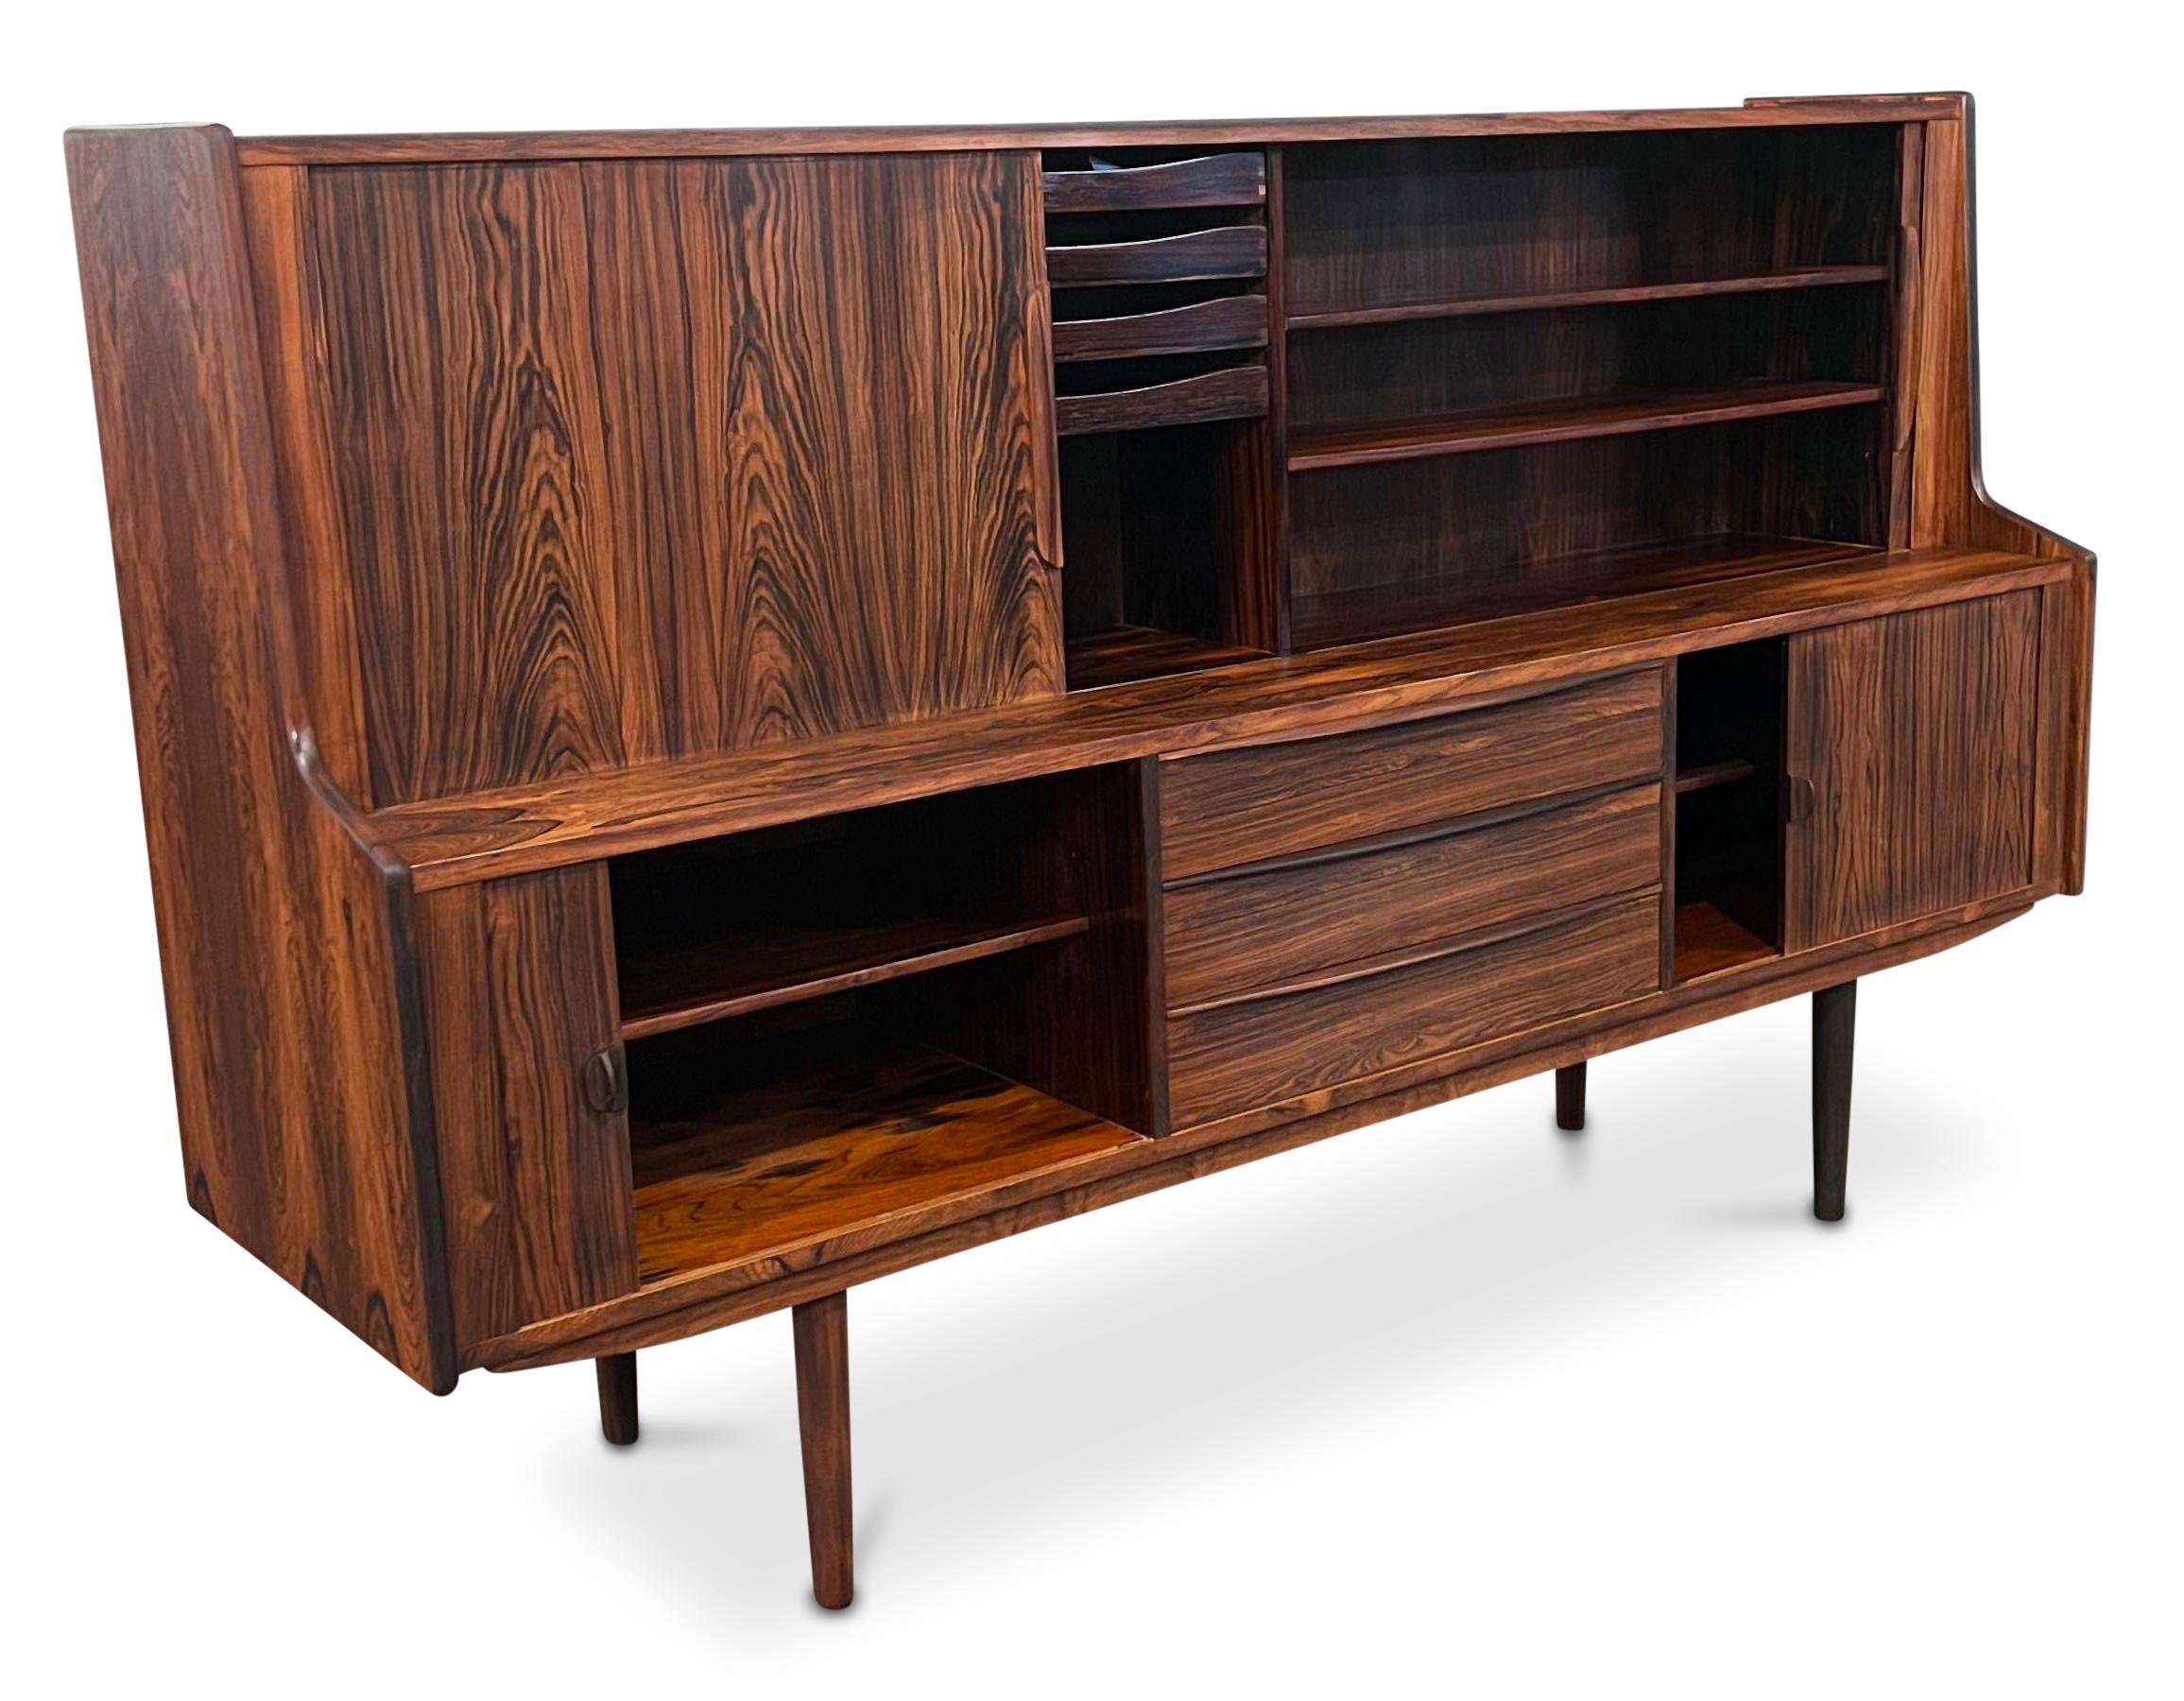 Very rare design Credenza in rosewood by Ib Kofod Larsen for Faarup Mobelfabrik

Brazilian rosewood have been illegal to harvest since 1961 and on the U.N. CITES list of endangered spices since 1992. For each piece of rosewood furniture we import to